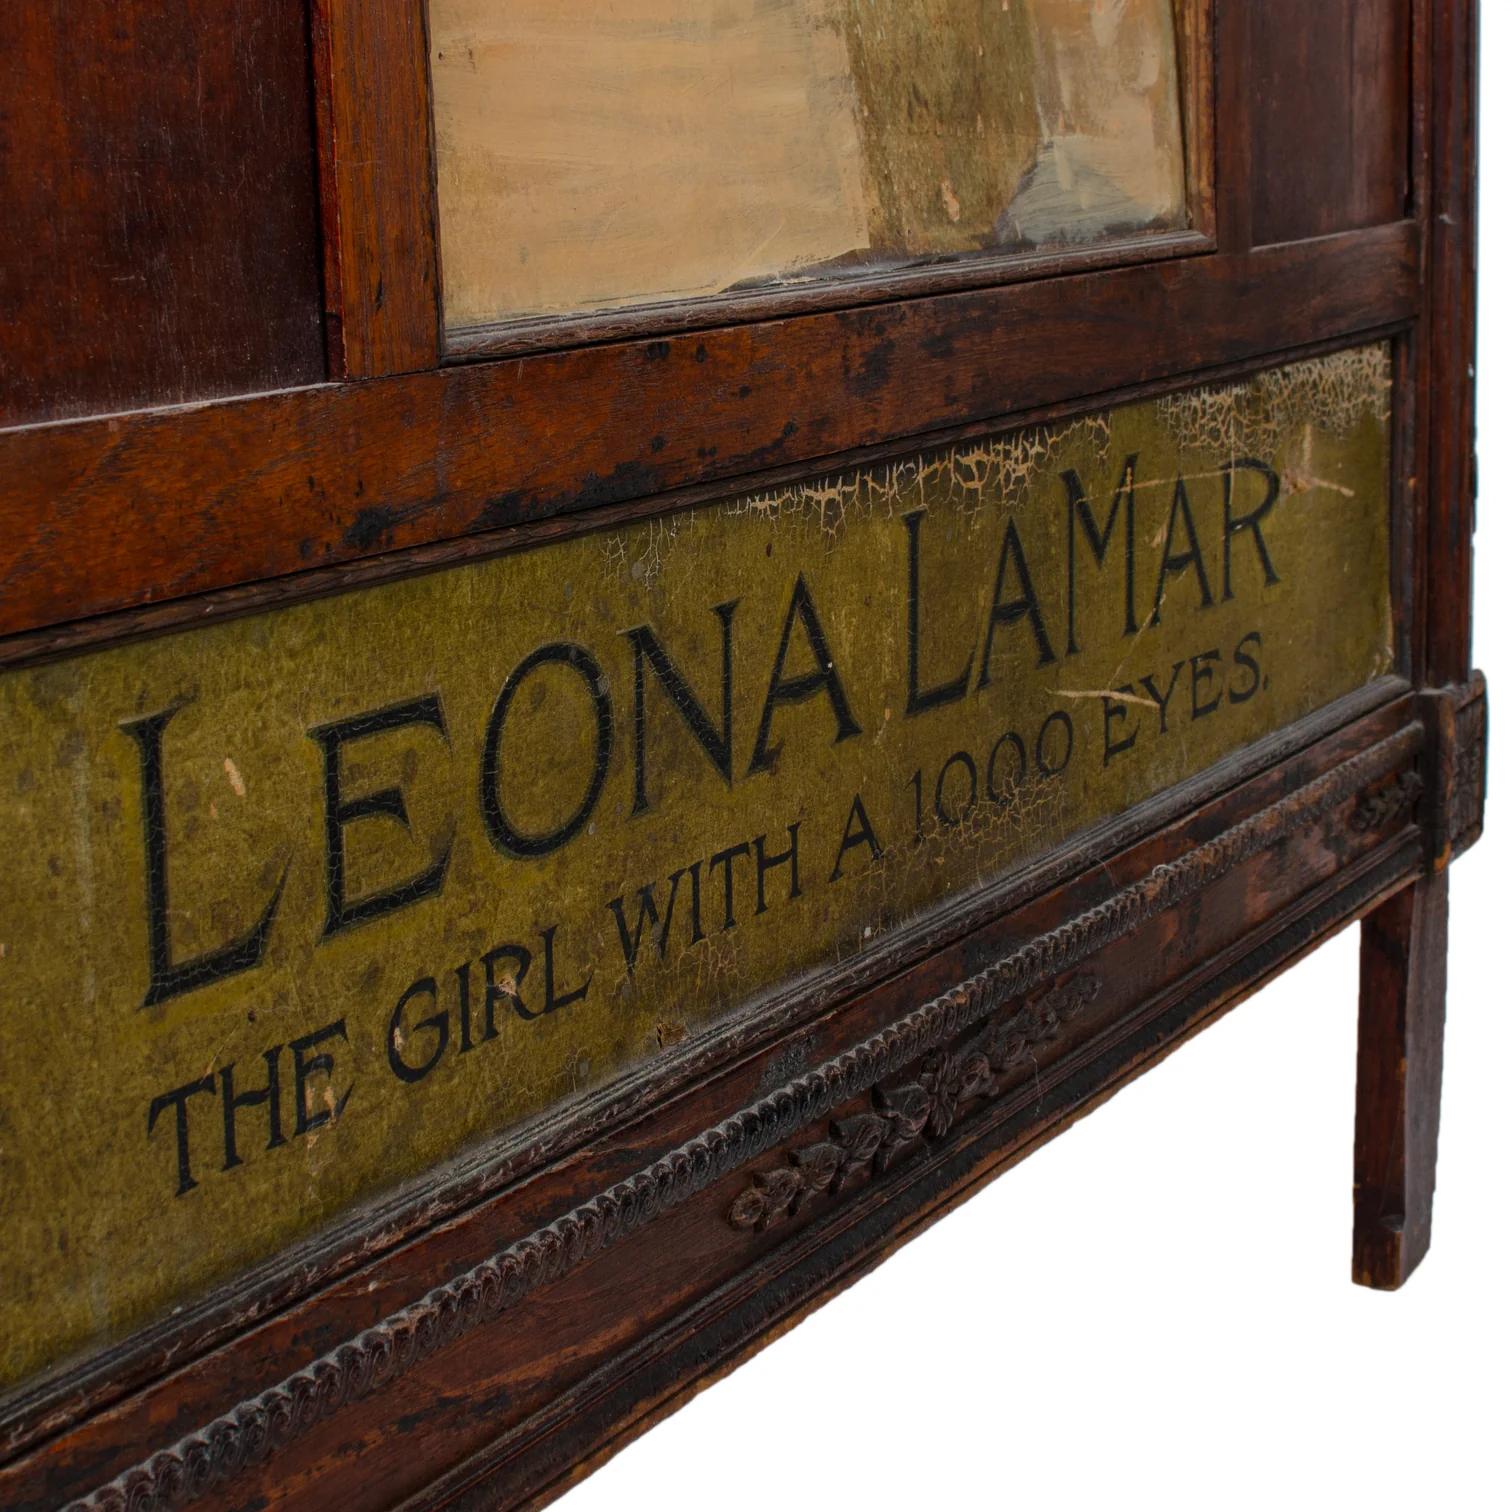 American Leona LaMar “The Girl With a 1000 Eyes” Vaudeville Mentalist Lobby Marquee